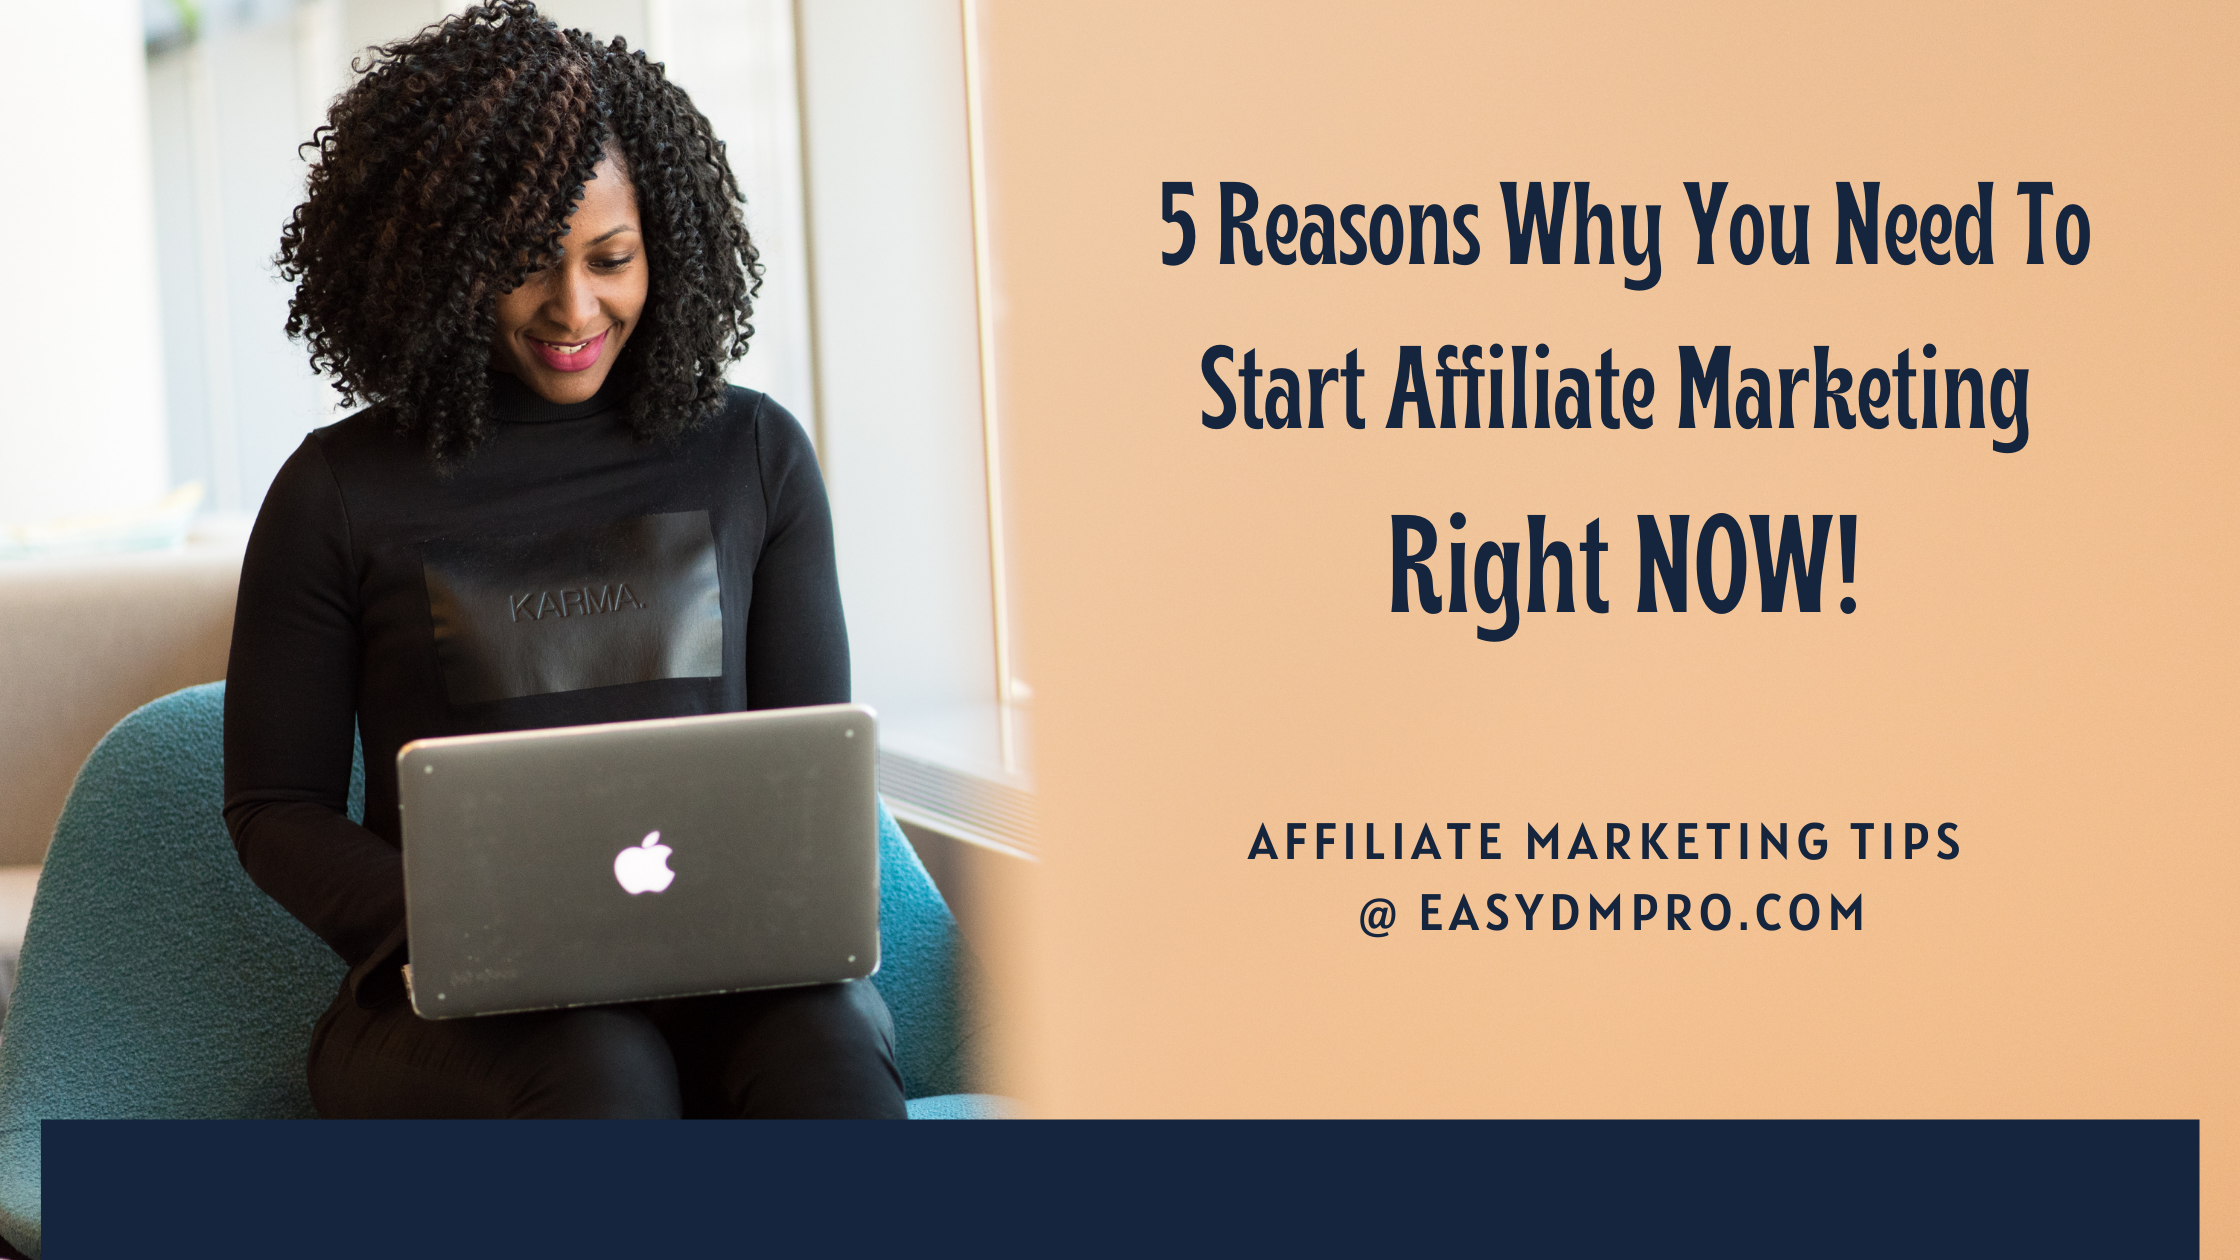 5 Reasons Why You Should Start Affiliate Marketing Business Right Now